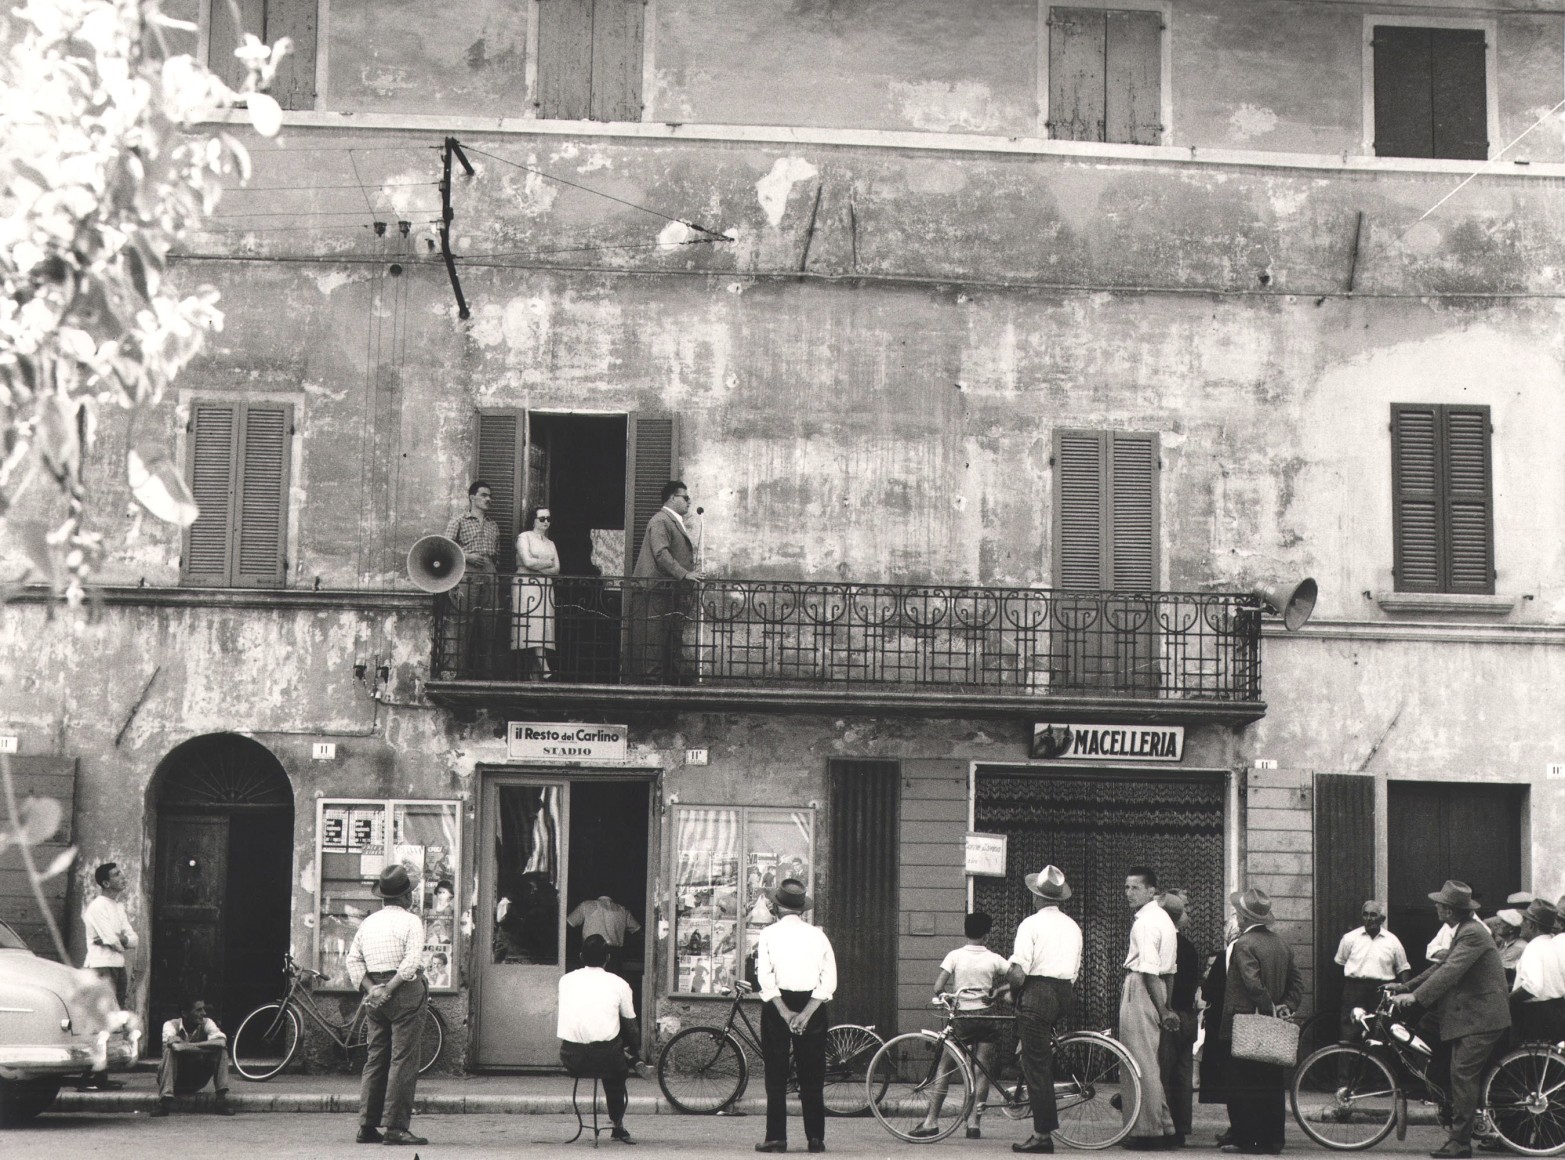 Nino Migliori, Gente dell'Emilia, 1957. People gather in the street as a man speaks into a microphone from a balcony.